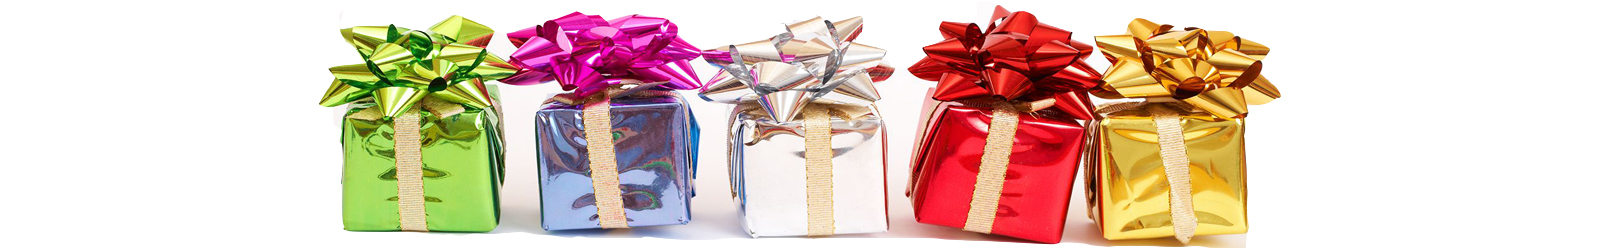 row of small wrapped boxes with bows